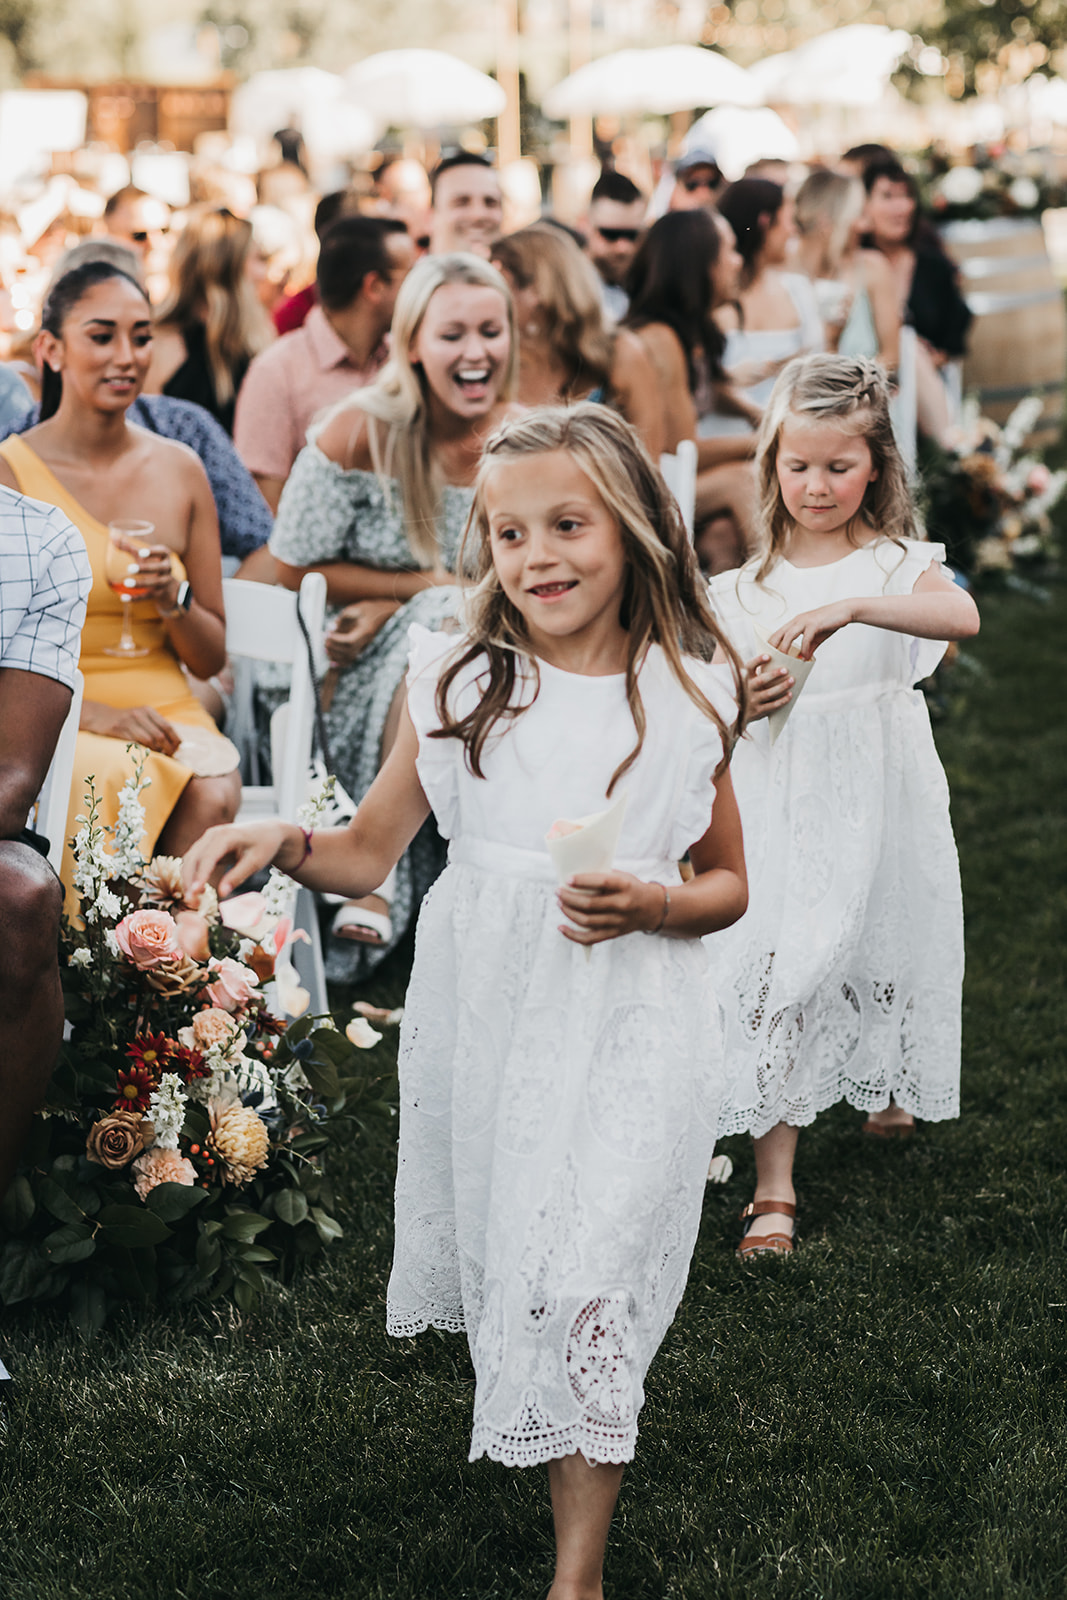 Flower girls walking down the aisle at winery wedding